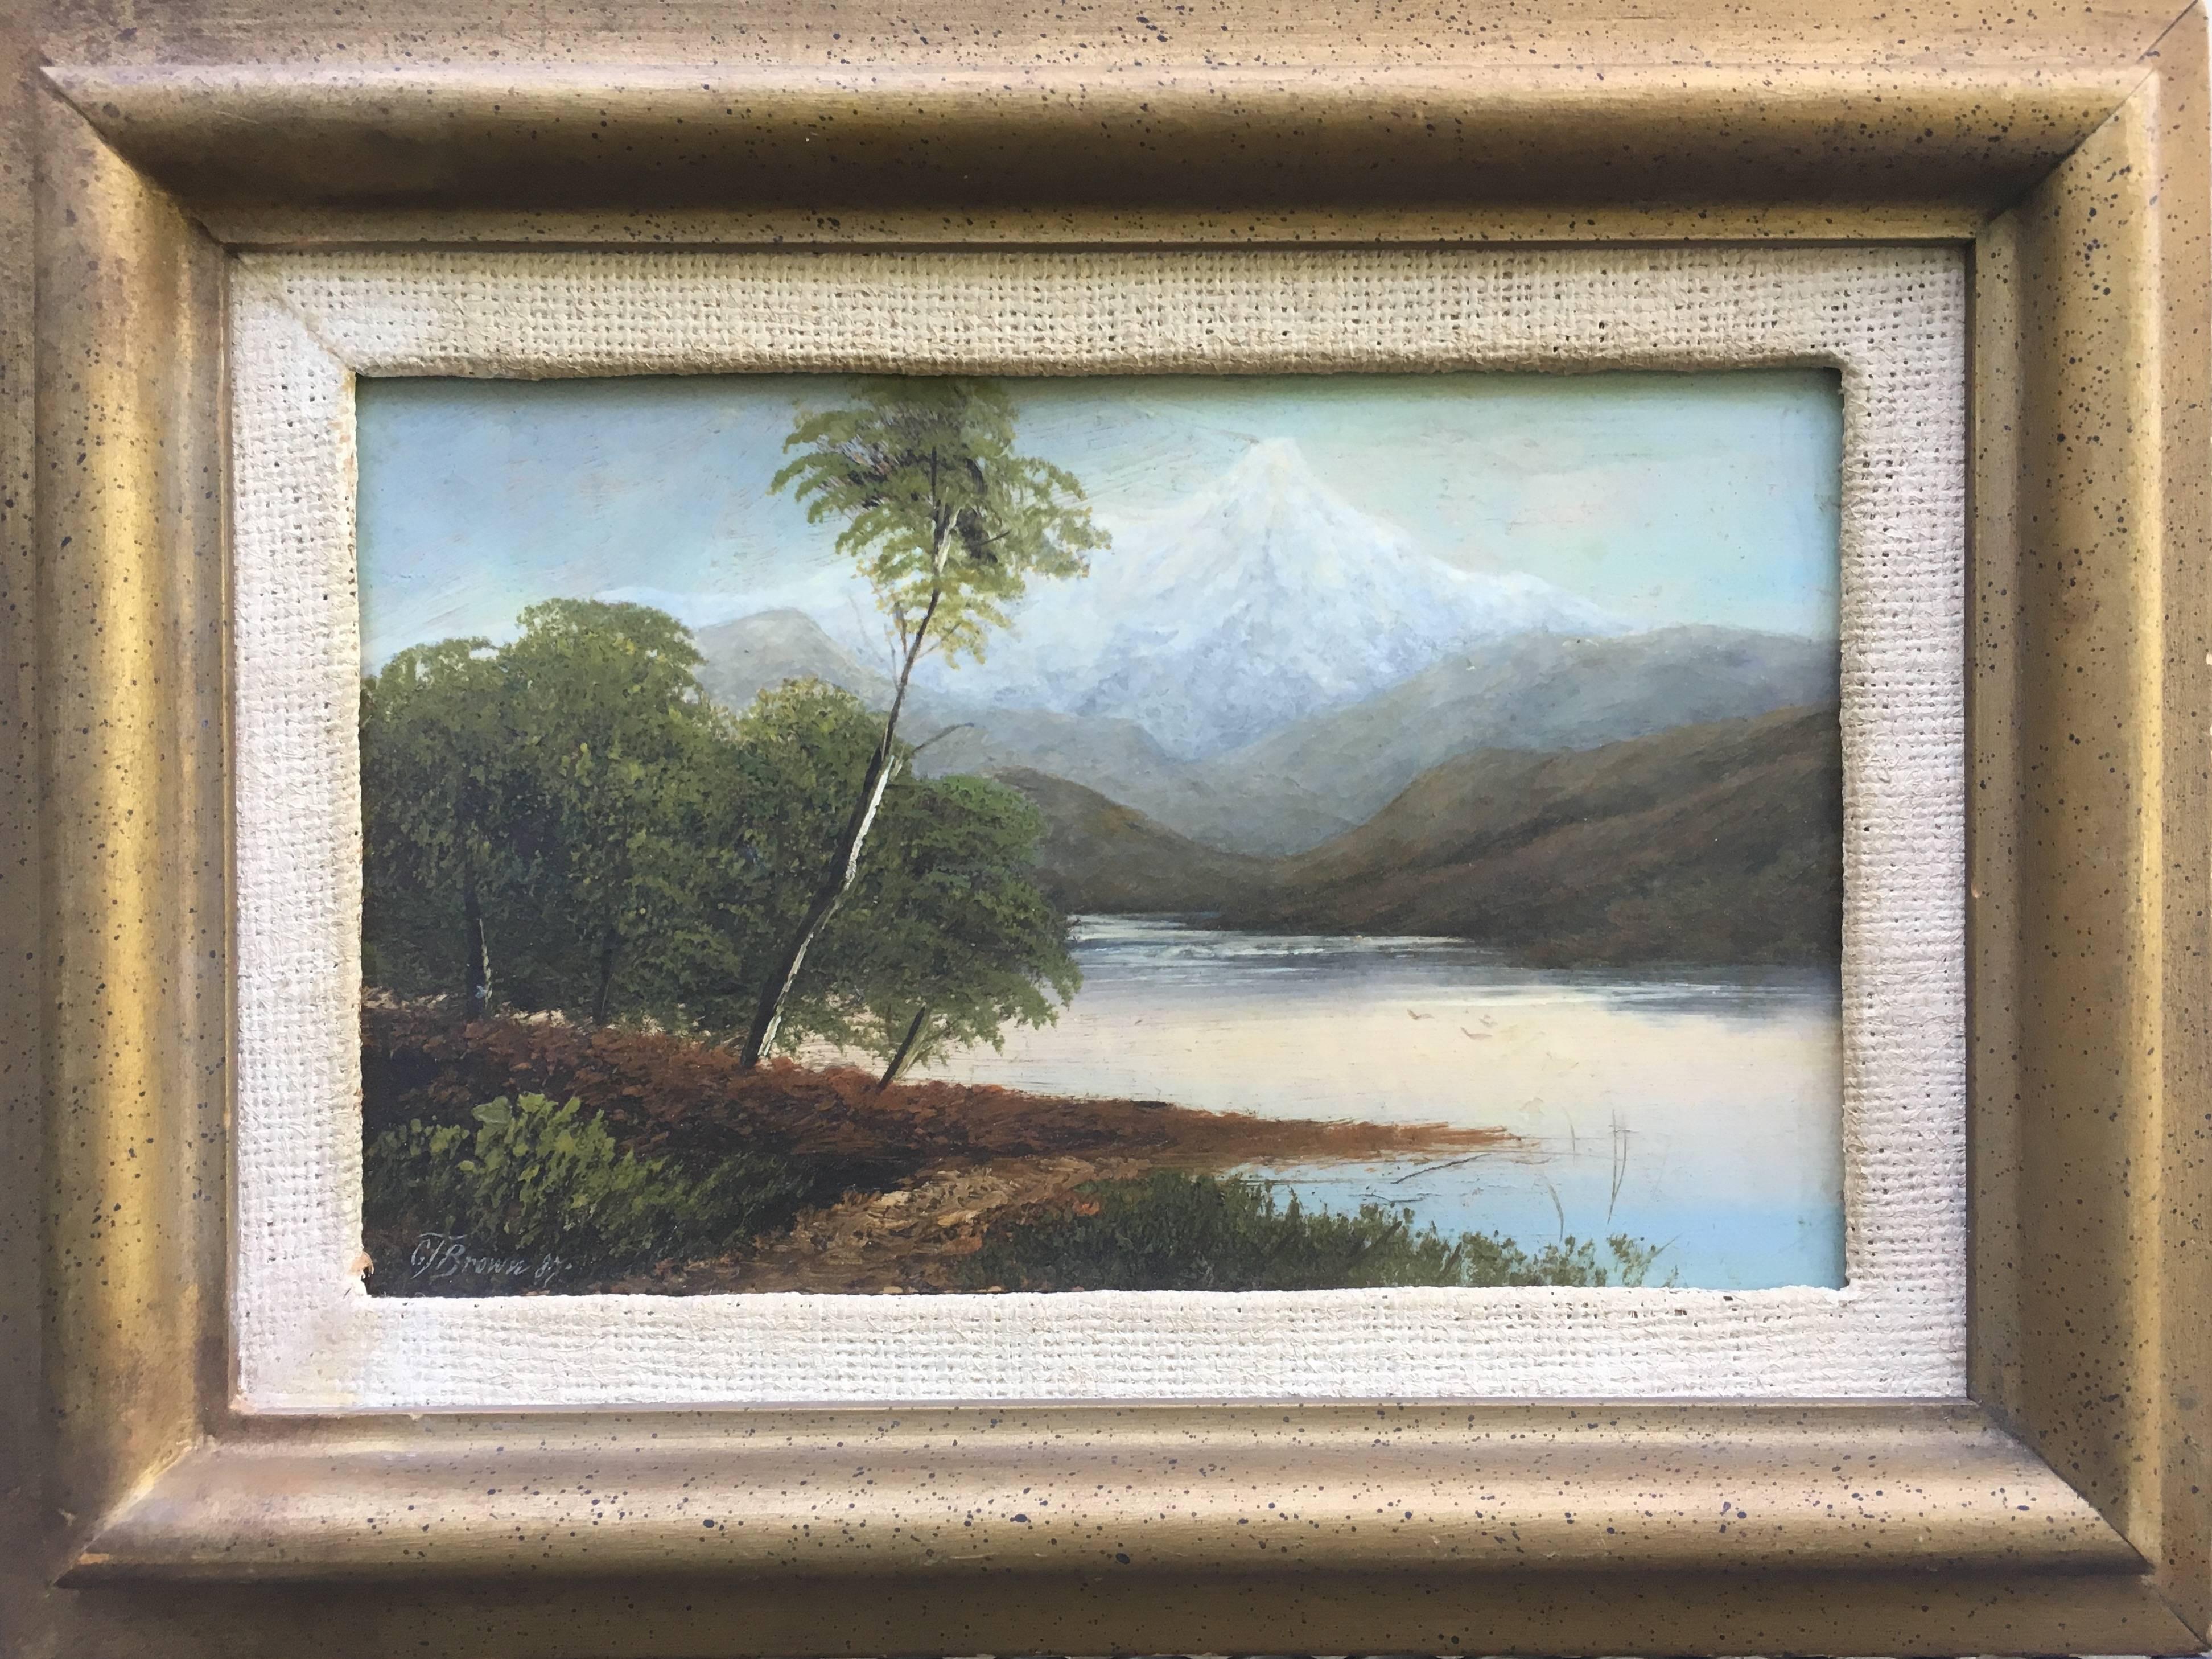 Grafton Brown Landscape Painting - Lake Scene with Snow Capped Mountain